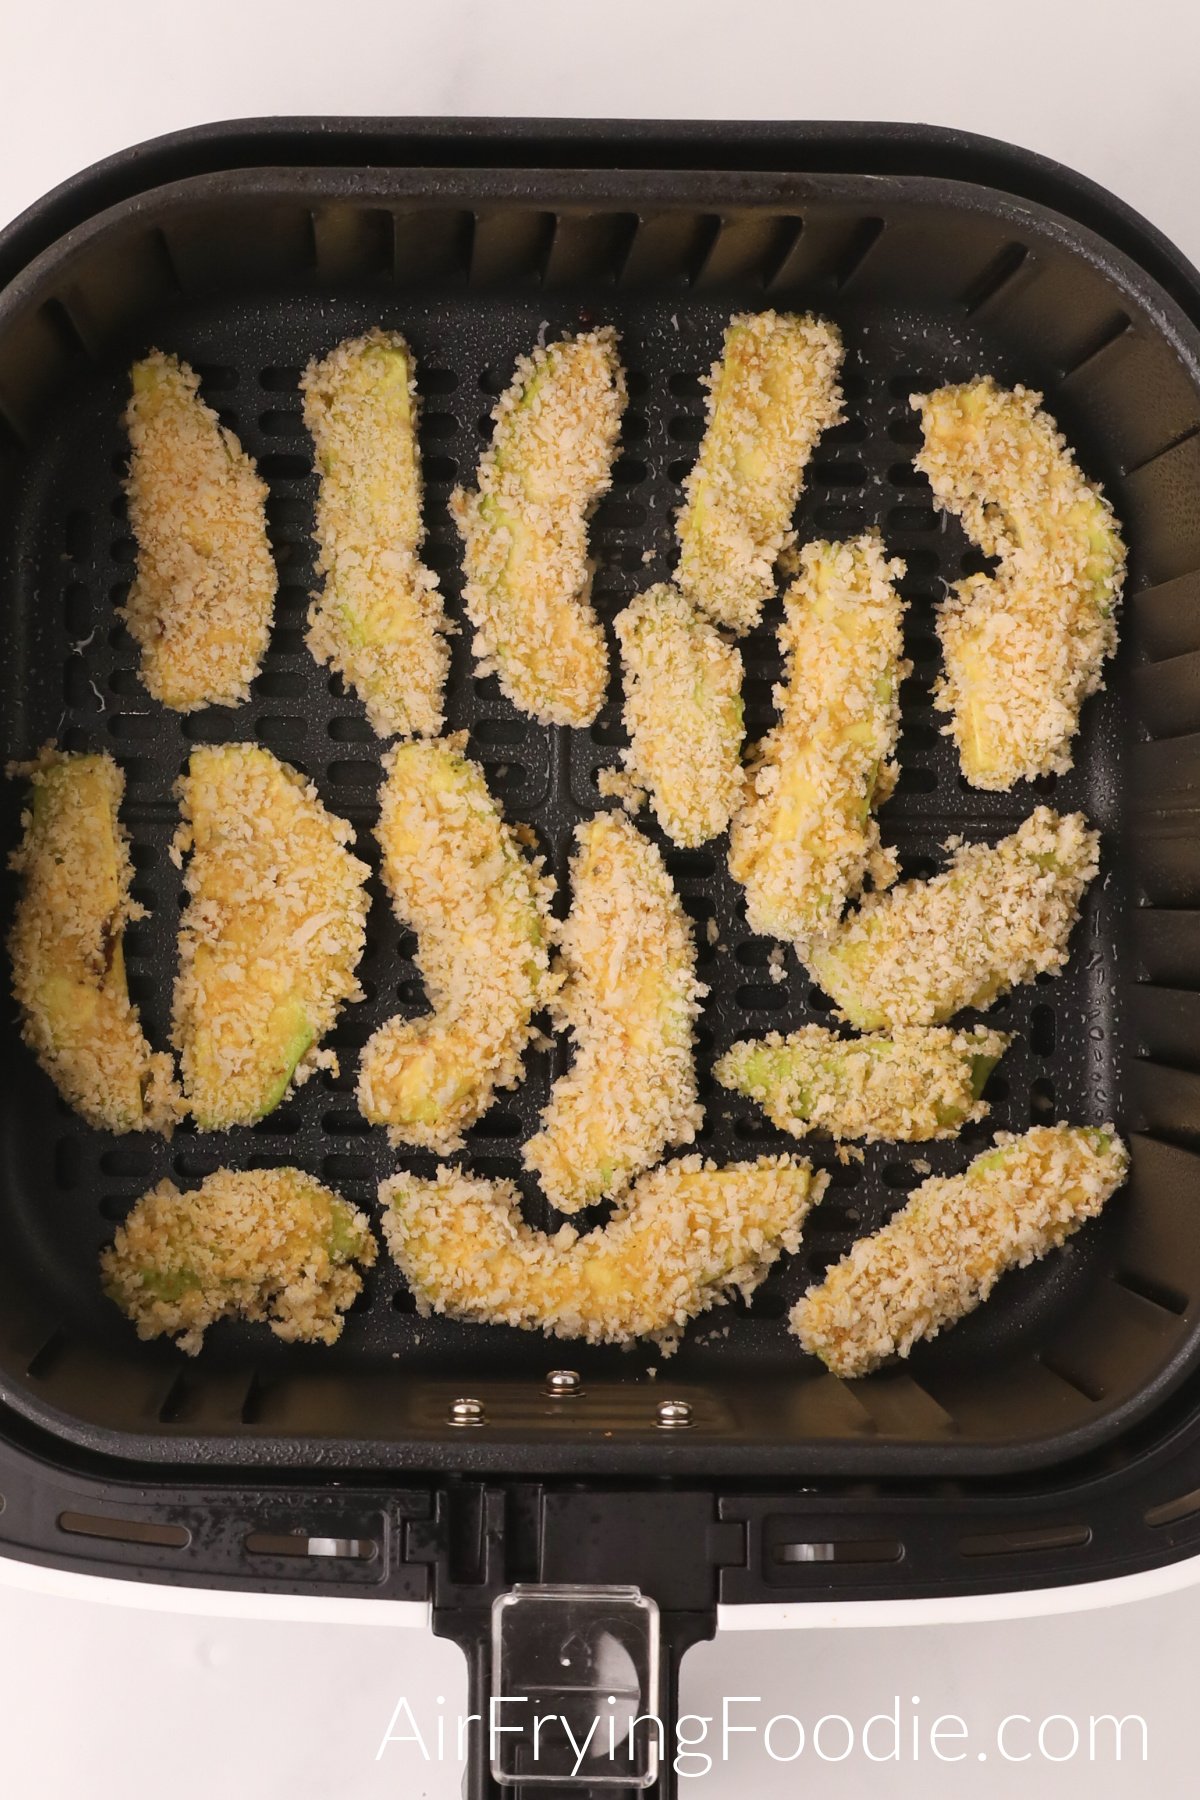 Avocado fries in the basket of the air fryer ready to be cooked.